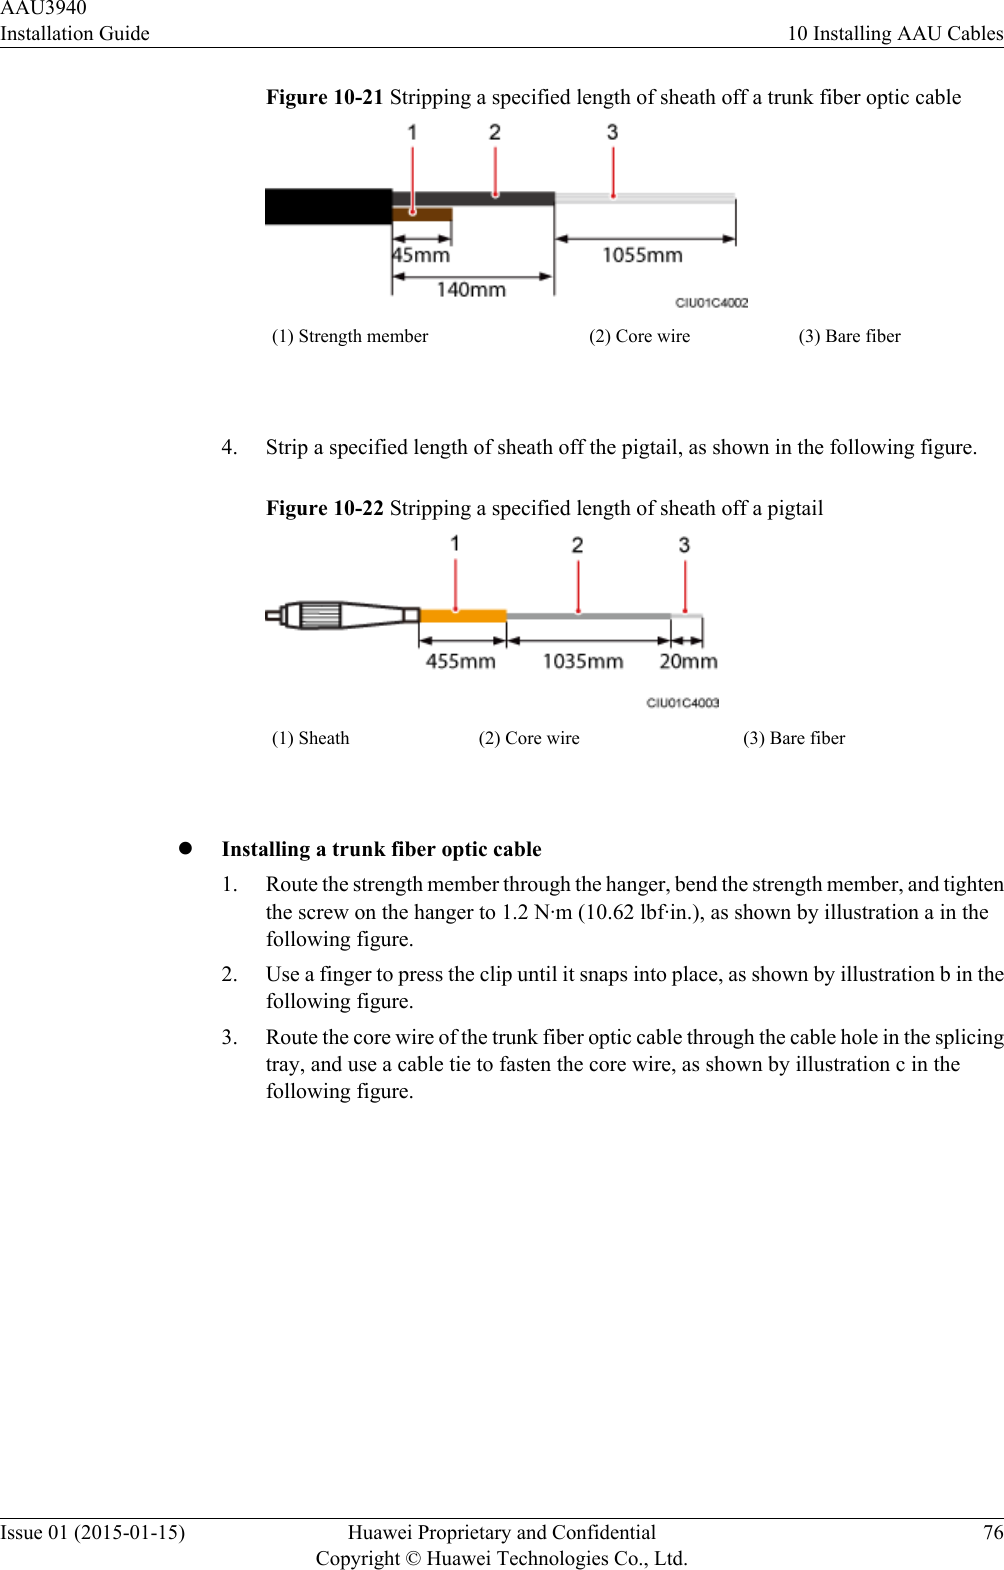 Figure 10-21 Stripping a specified length of sheath off a trunk fiber optic cable(1) Strength member (2) Core wire (3) Bare fiber 4. Strip a specified length of sheath off the pigtail, as shown in the following figure.Figure 10-22 Stripping a specified length of sheath off a pigtail(1) Sheath (2) Core wire (3) Bare fiber lInstalling a trunk fiber optic cable1. Route the strength member through the hanger, bend the strength member, and tightenthe screw on the hanger to 1.2 N·m (10.62 lbf·in.), as shown by illustration a in thefollowing figure.2. Use a finger to press the clip until it snaps into place, as shown by illustration b in thefollowing figure.3. Route the core wire of the trunk fiber optic cable through the cable hole in the splicingtray, and use a cable tie to fasten the core wire, as shown by illustration c in thefollowing figure.AAU3940Installation Guide 10 Installing AAU CablesIssue 01 (2015-01-15) Huawei Proprietary and ConfidentialCopyright © Huawei Technologies Co., Ltd.76